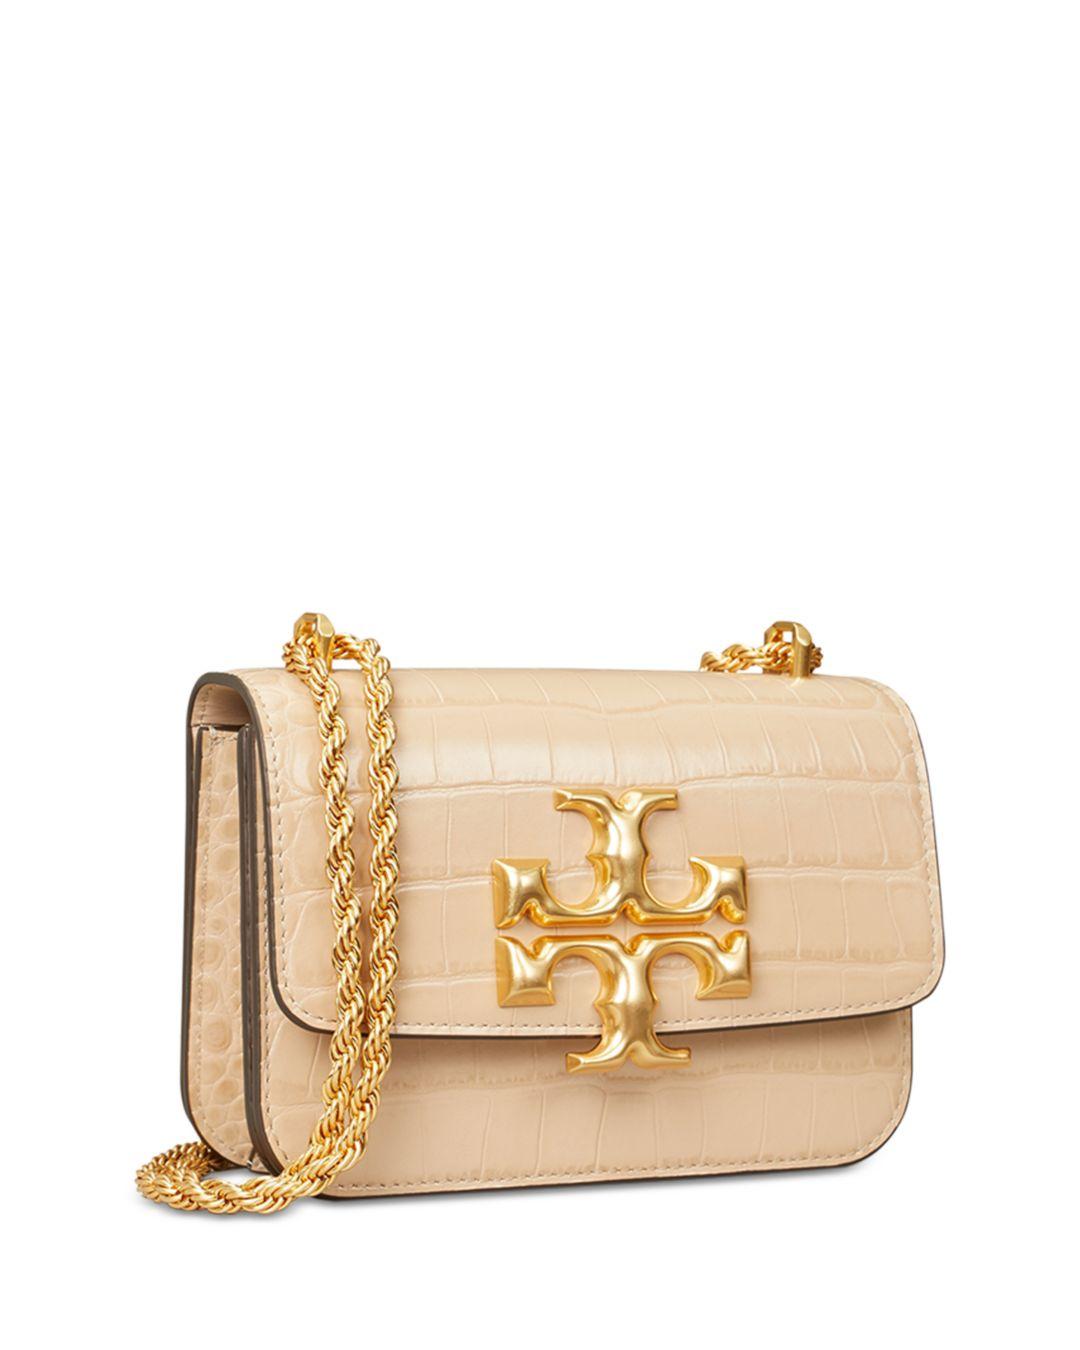 Tory Burch Eleanor Small Bag in Natural | Lyst